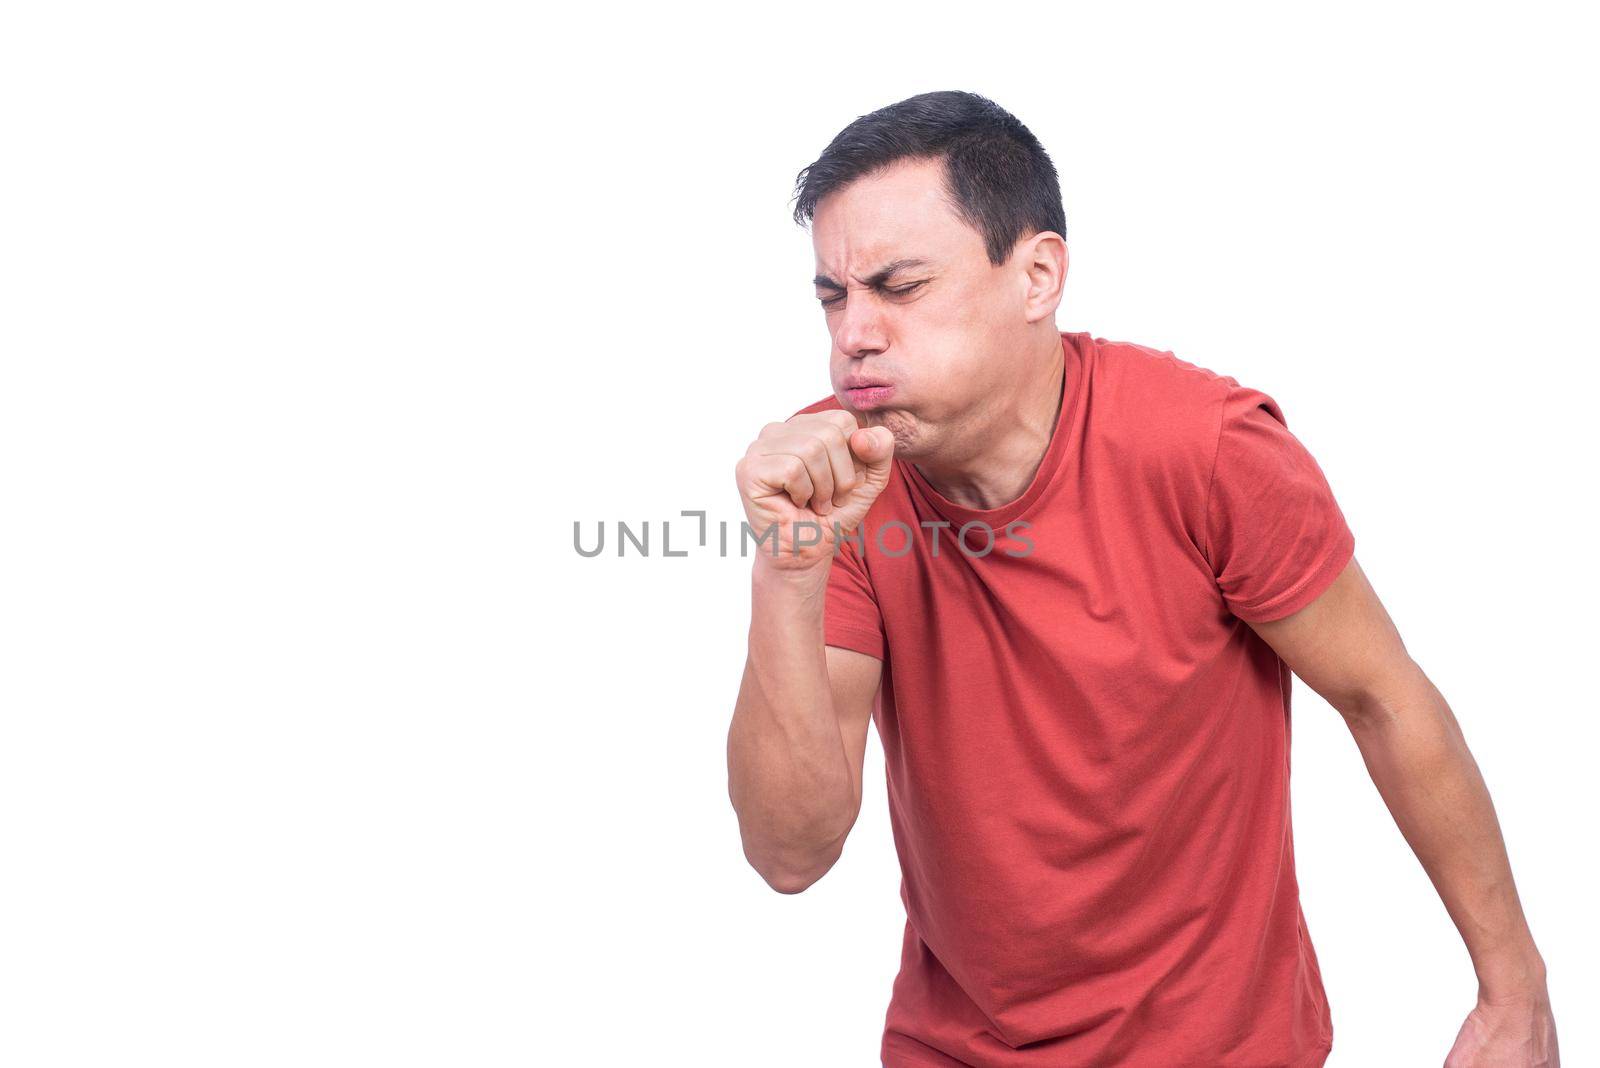 Isolated man in red t shirt coughing with fist near mouth while standing against blank backdrop